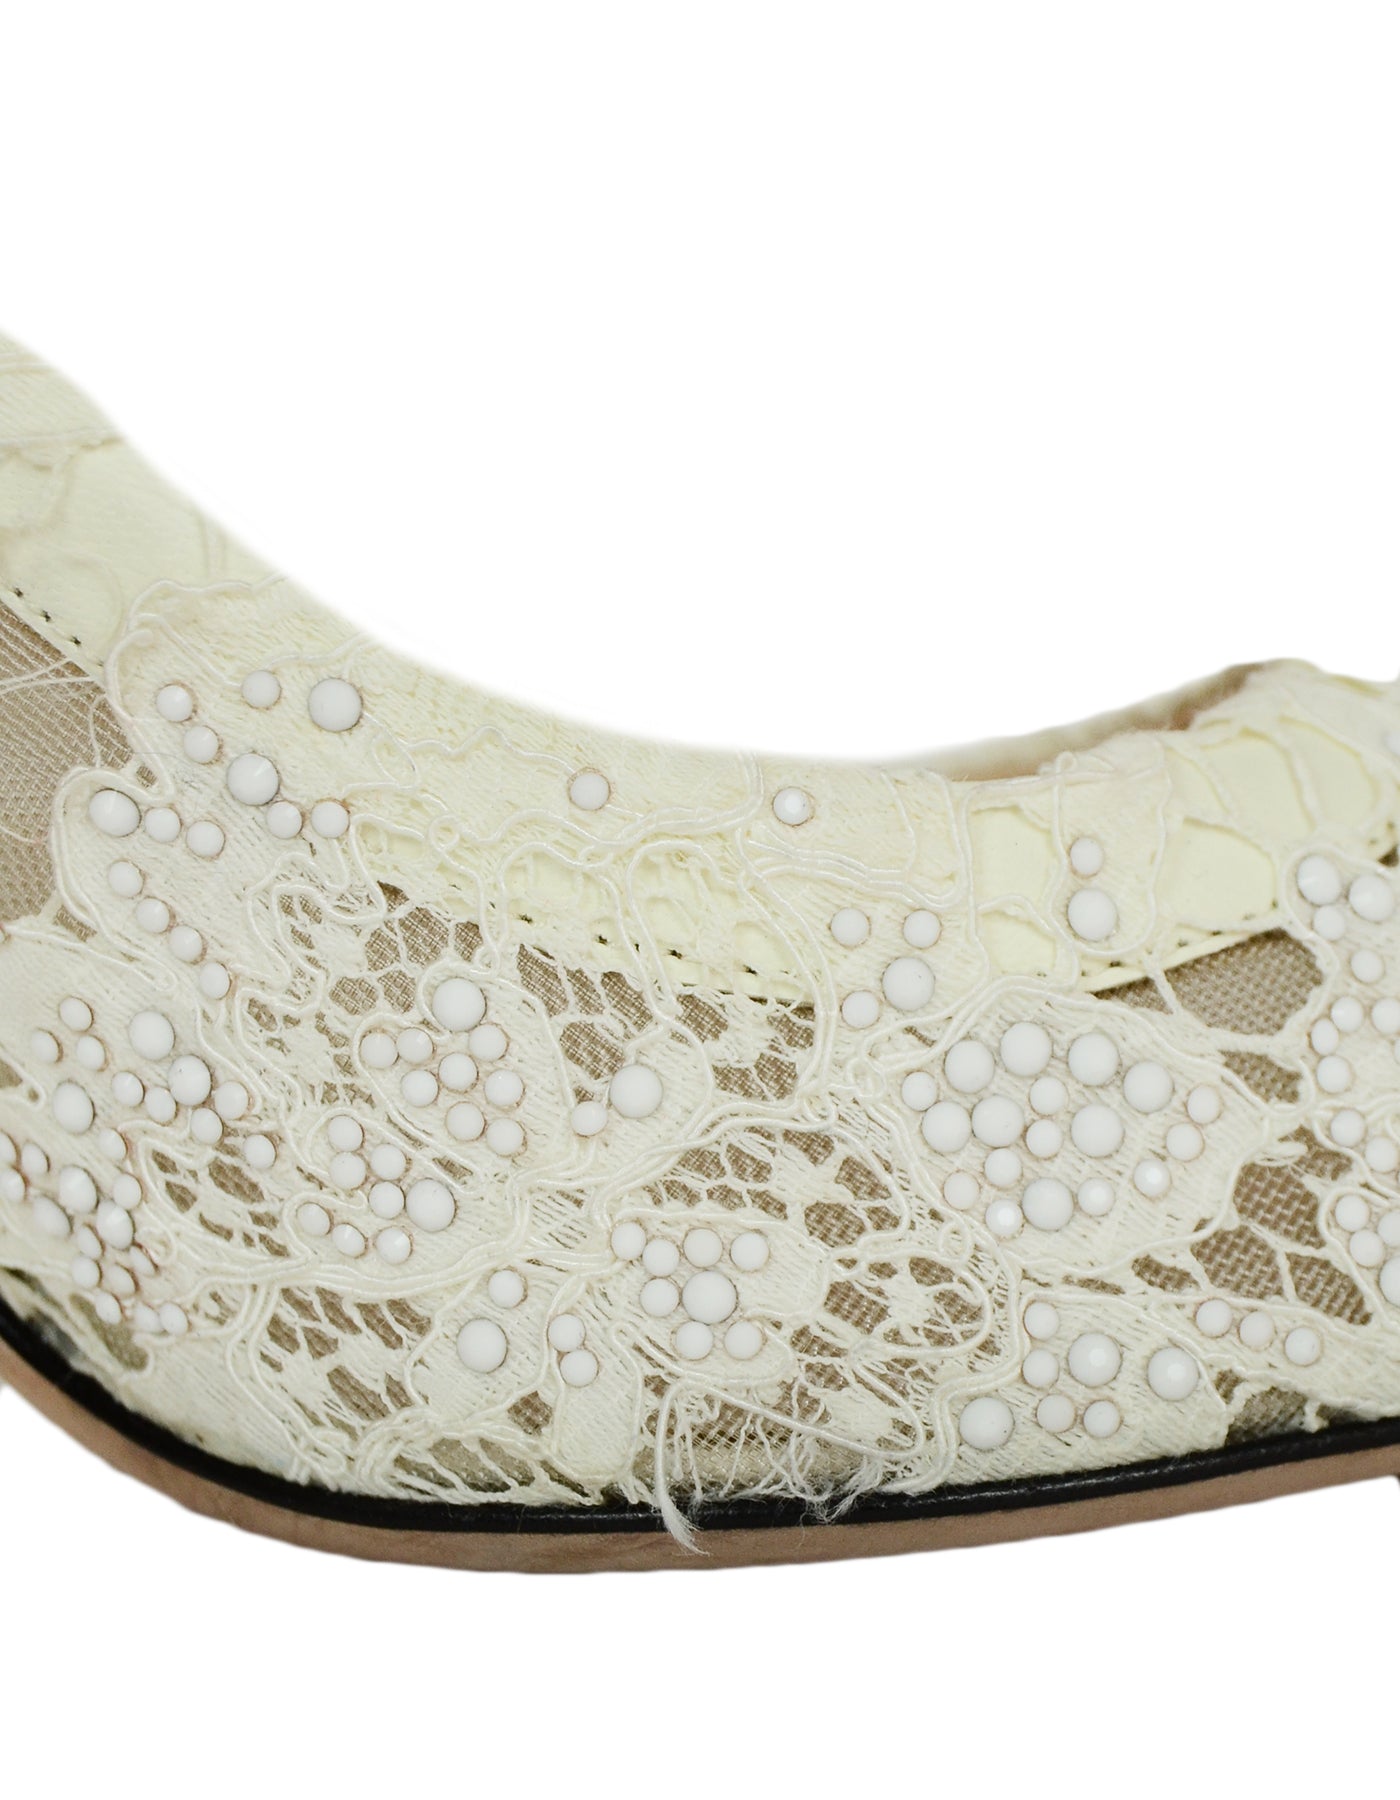 Valentino White Lace/Crystal Point Toe Pumps sz 39 rt. $1,695